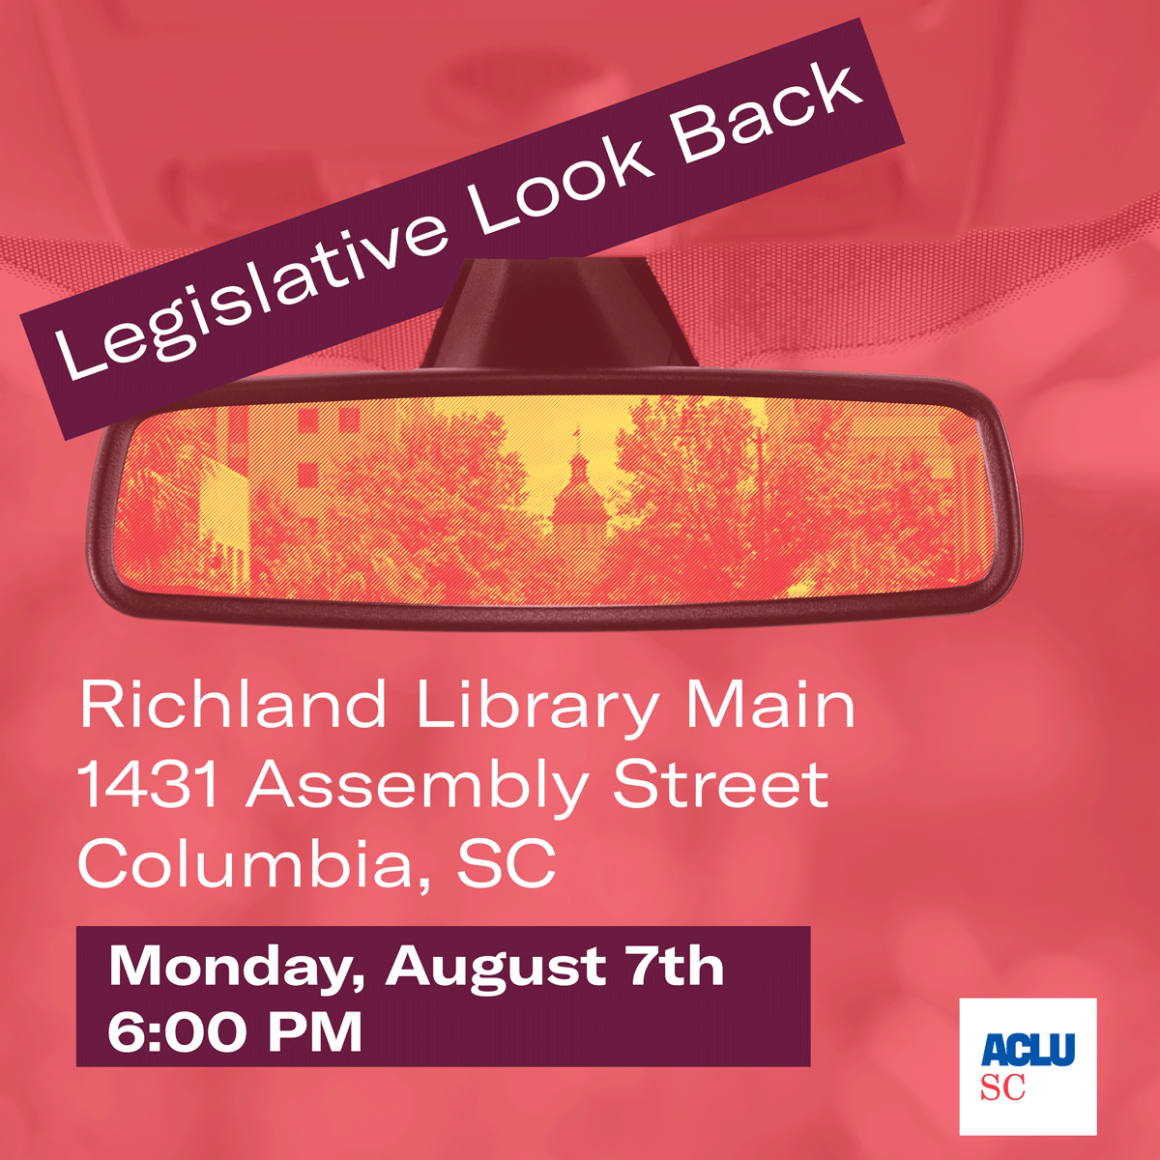 An infographic reads: "Legislative Look Back. Richland Library Main, 1431 Assembly Street, Columbia, SC. Monday, August 7th, 6:00 PM." The red and yellow graphic features a rearview car mirror with the Statehouse dome reflected.